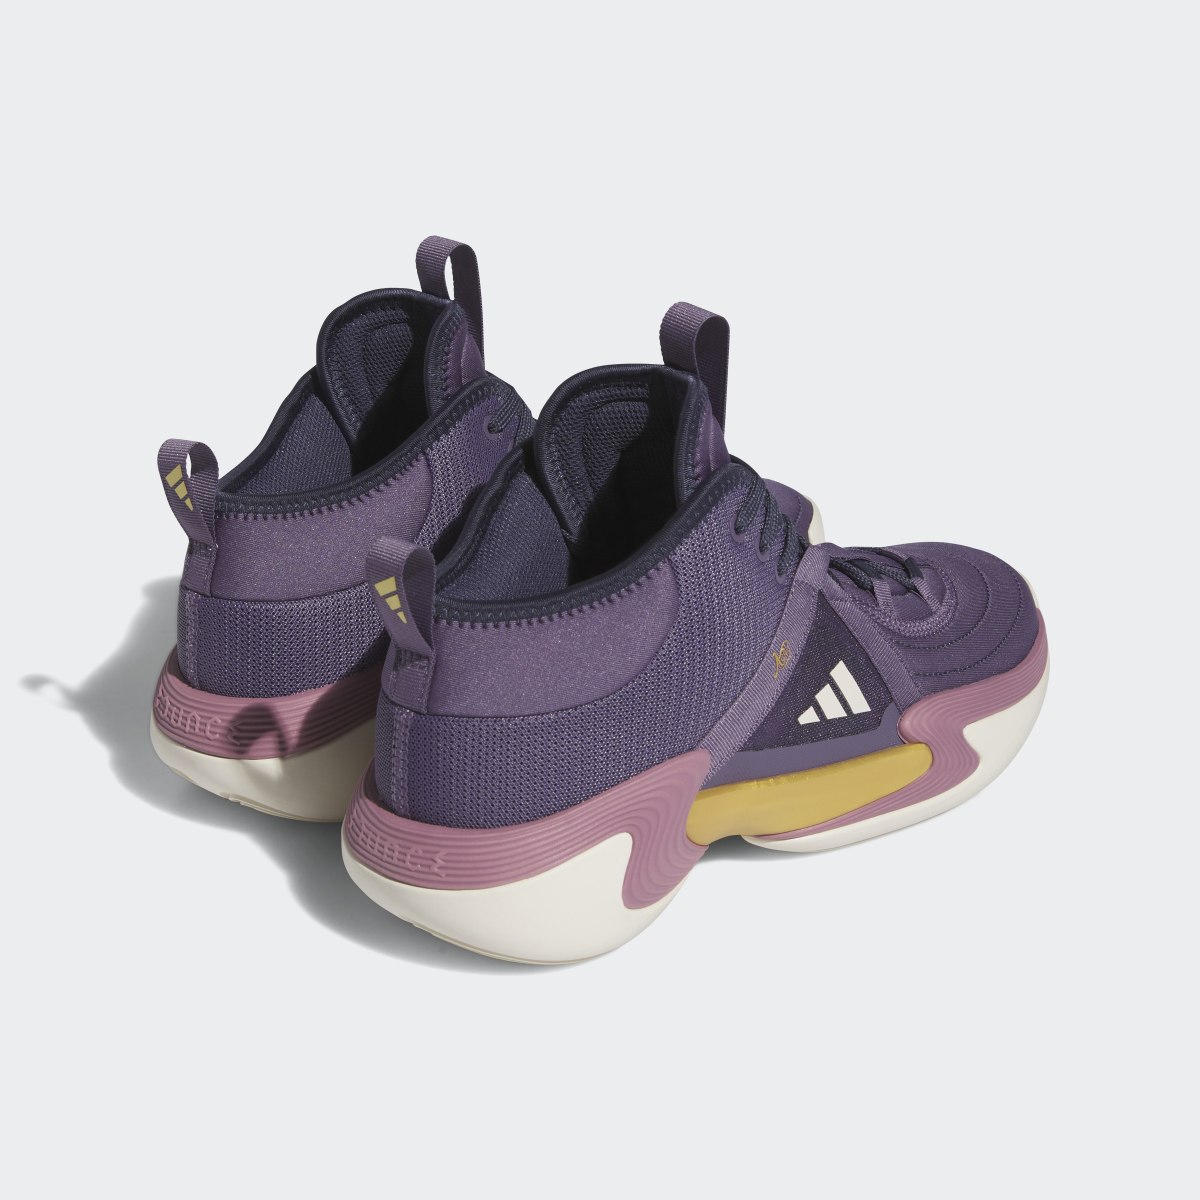 Adidas Exhibit Select CP Mid Basketball Shoes. 9